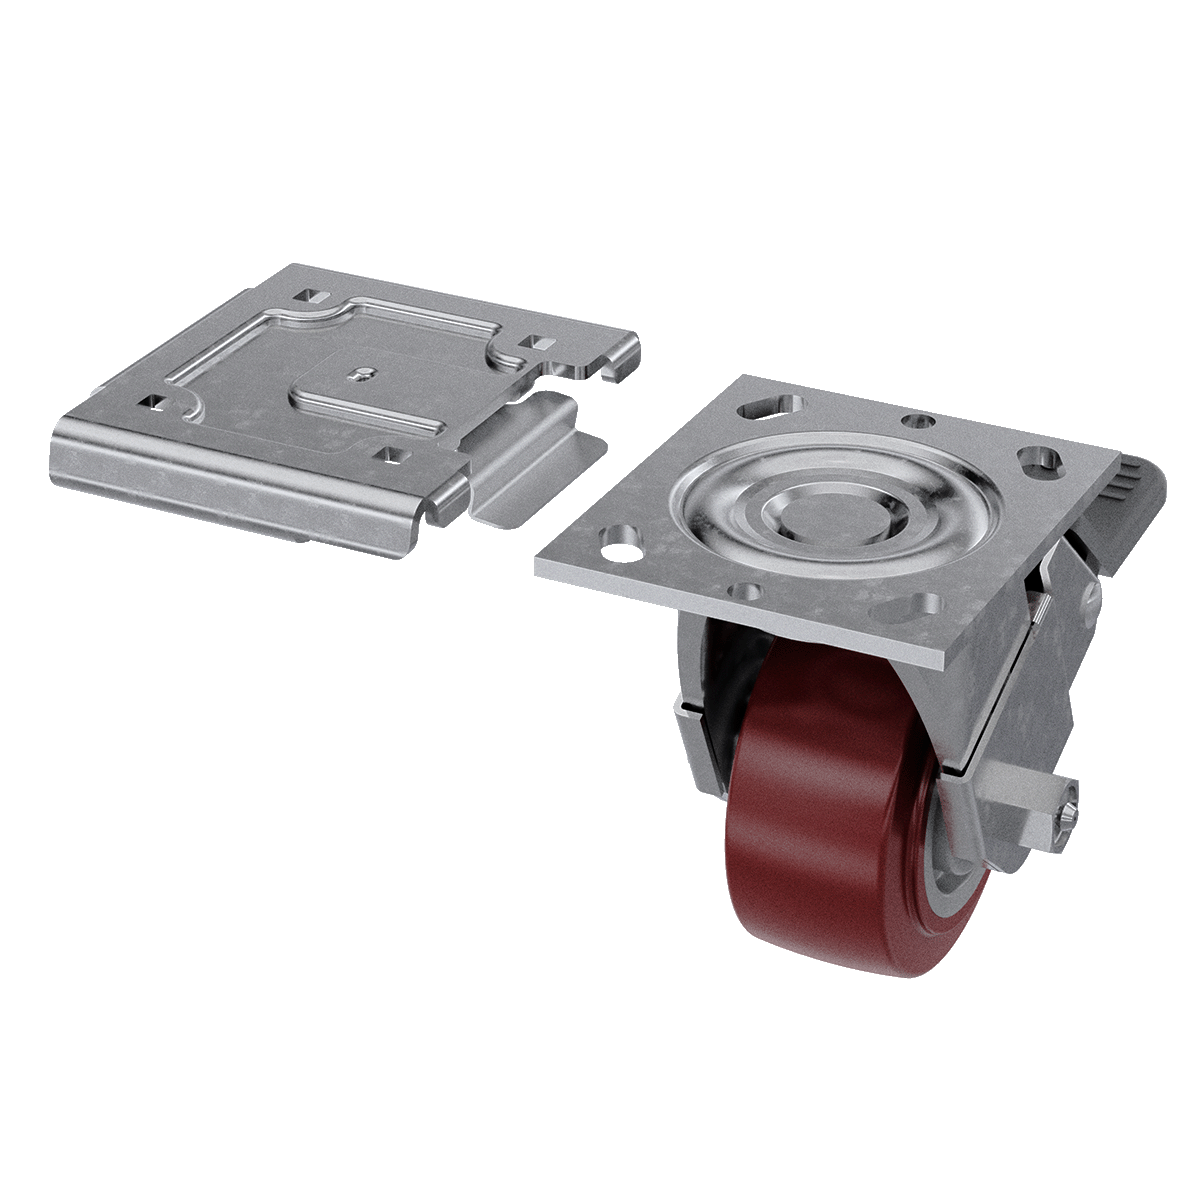 4x2 swivel caster shown with large quick release caster plate